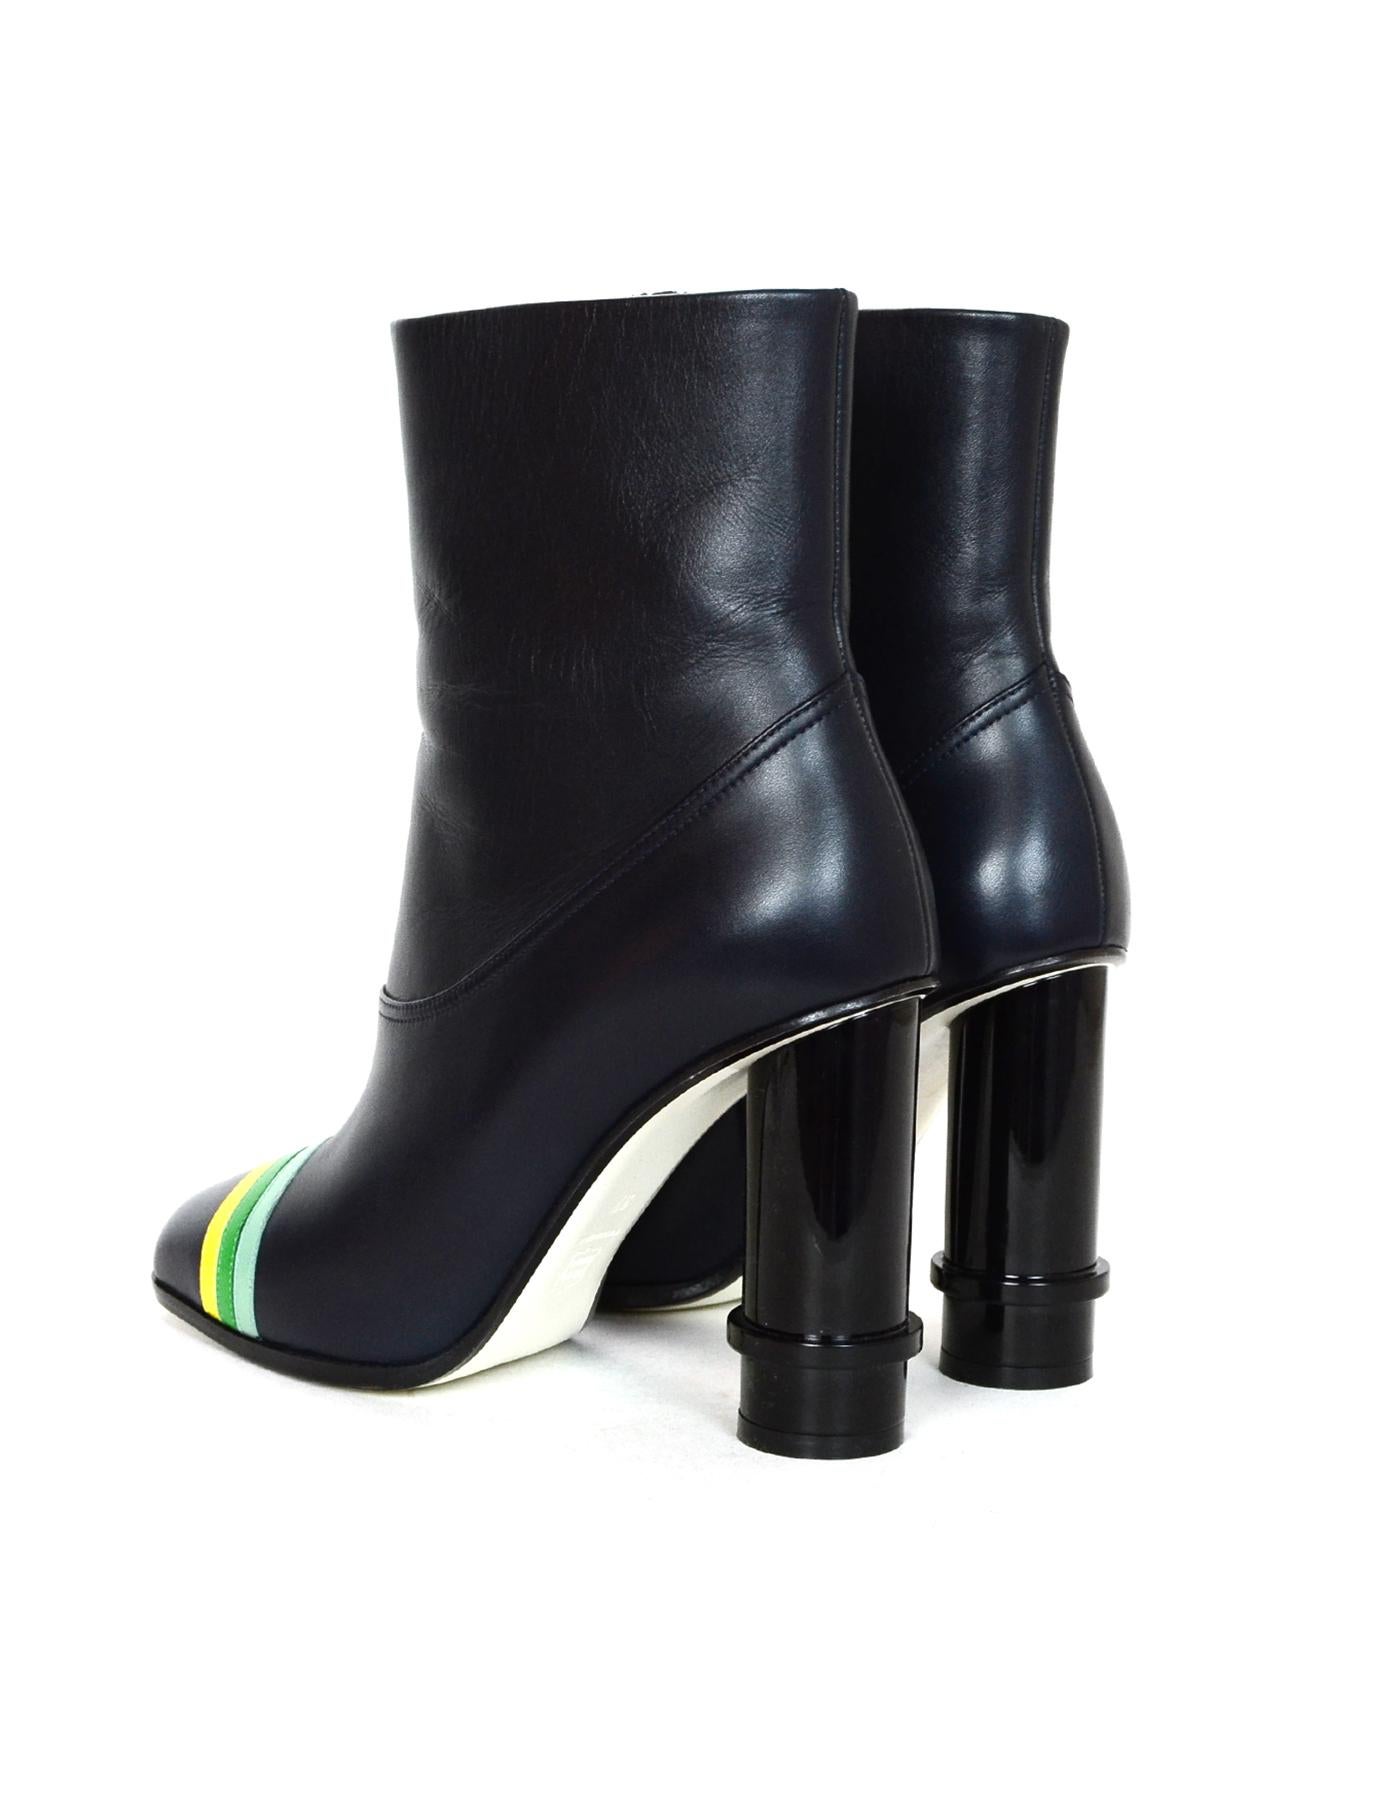 Loewe Navy Heeled Boot W/ Green/Yellow Chevron Striped Toe Design Sz 37 In New Condition In New York, NY